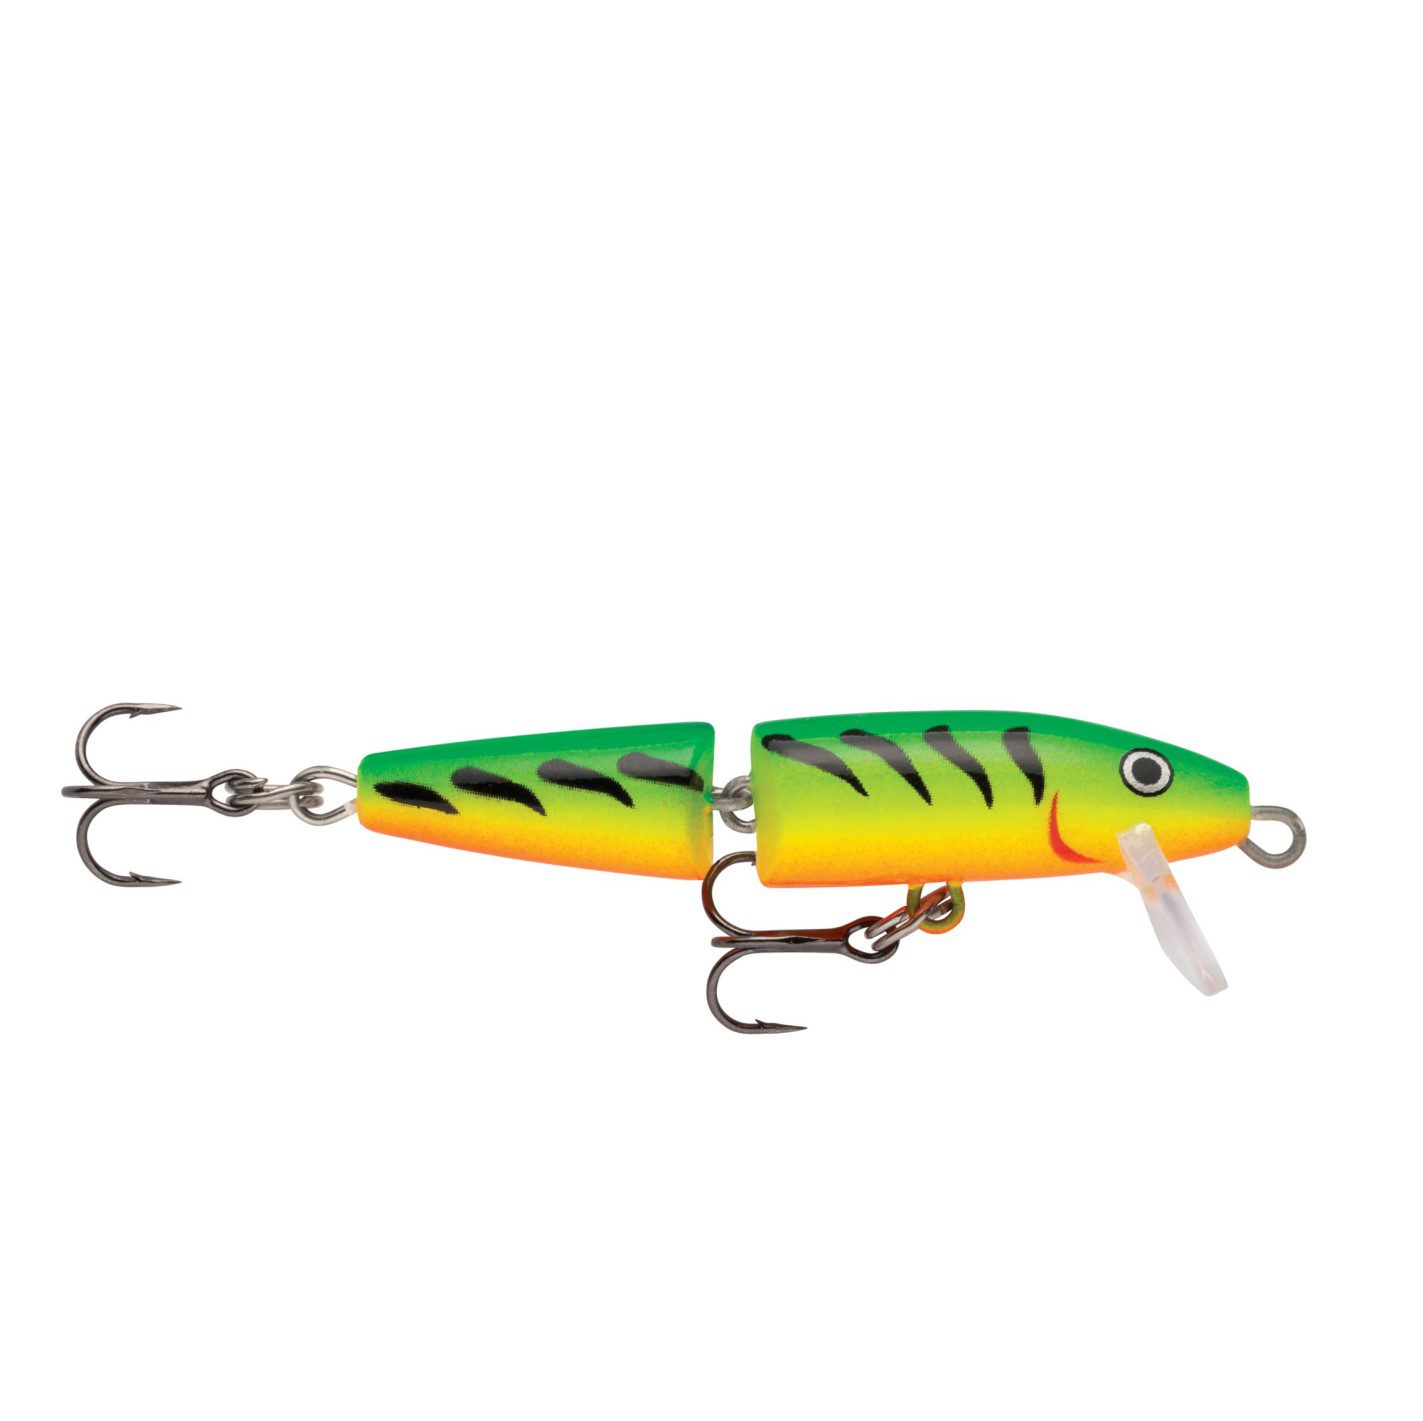 RAPALA 3 1/2 (J09) JOINTED ORIGINAL MINNOW - Northwoods Wholesale Outlet